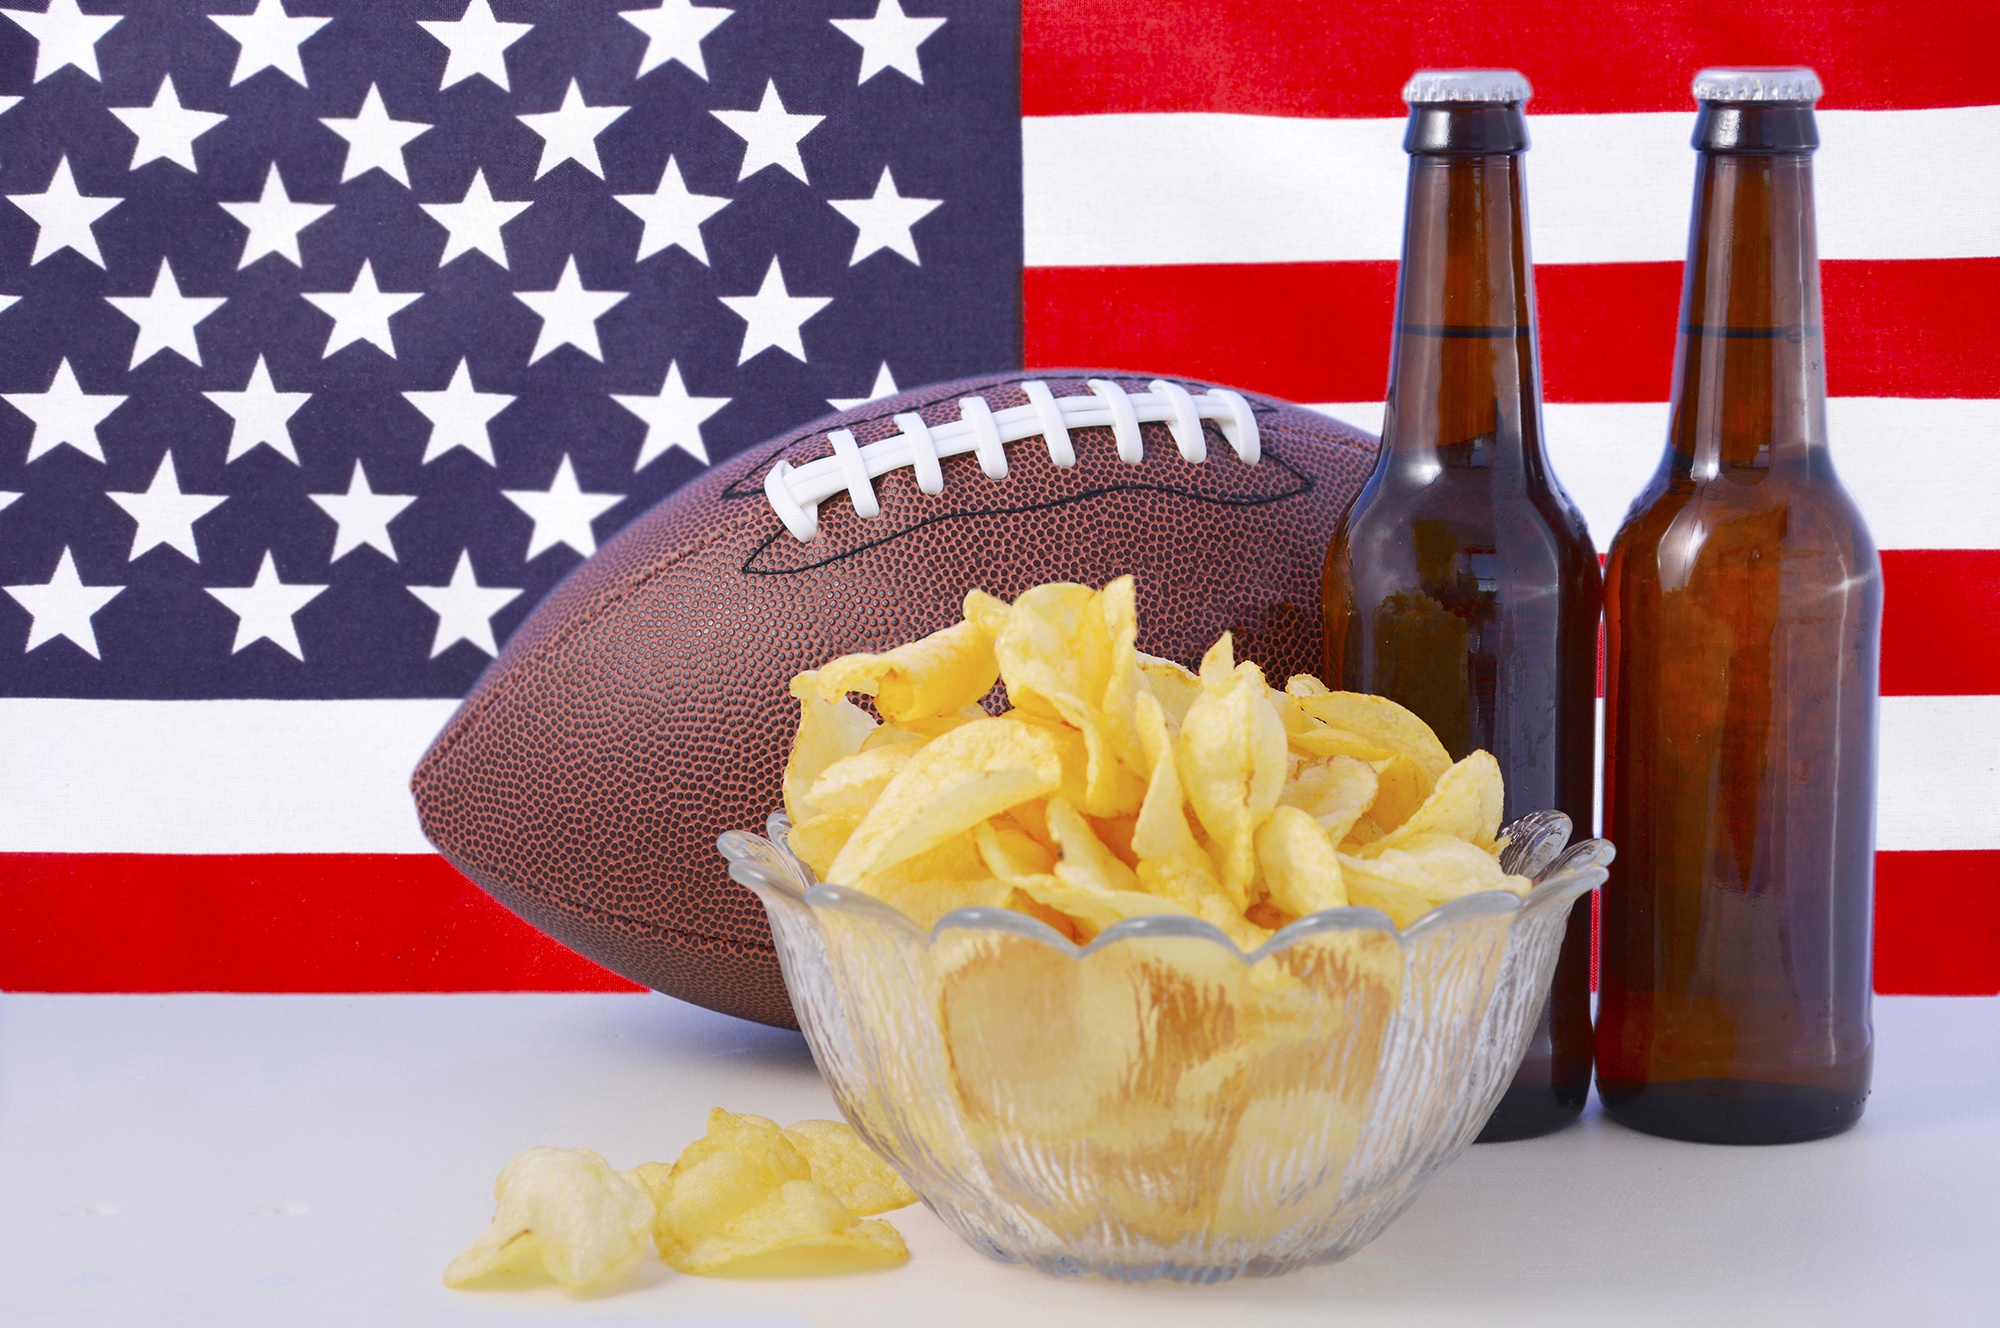 photography, still life, alcohol, american flag, ball, beer, chips